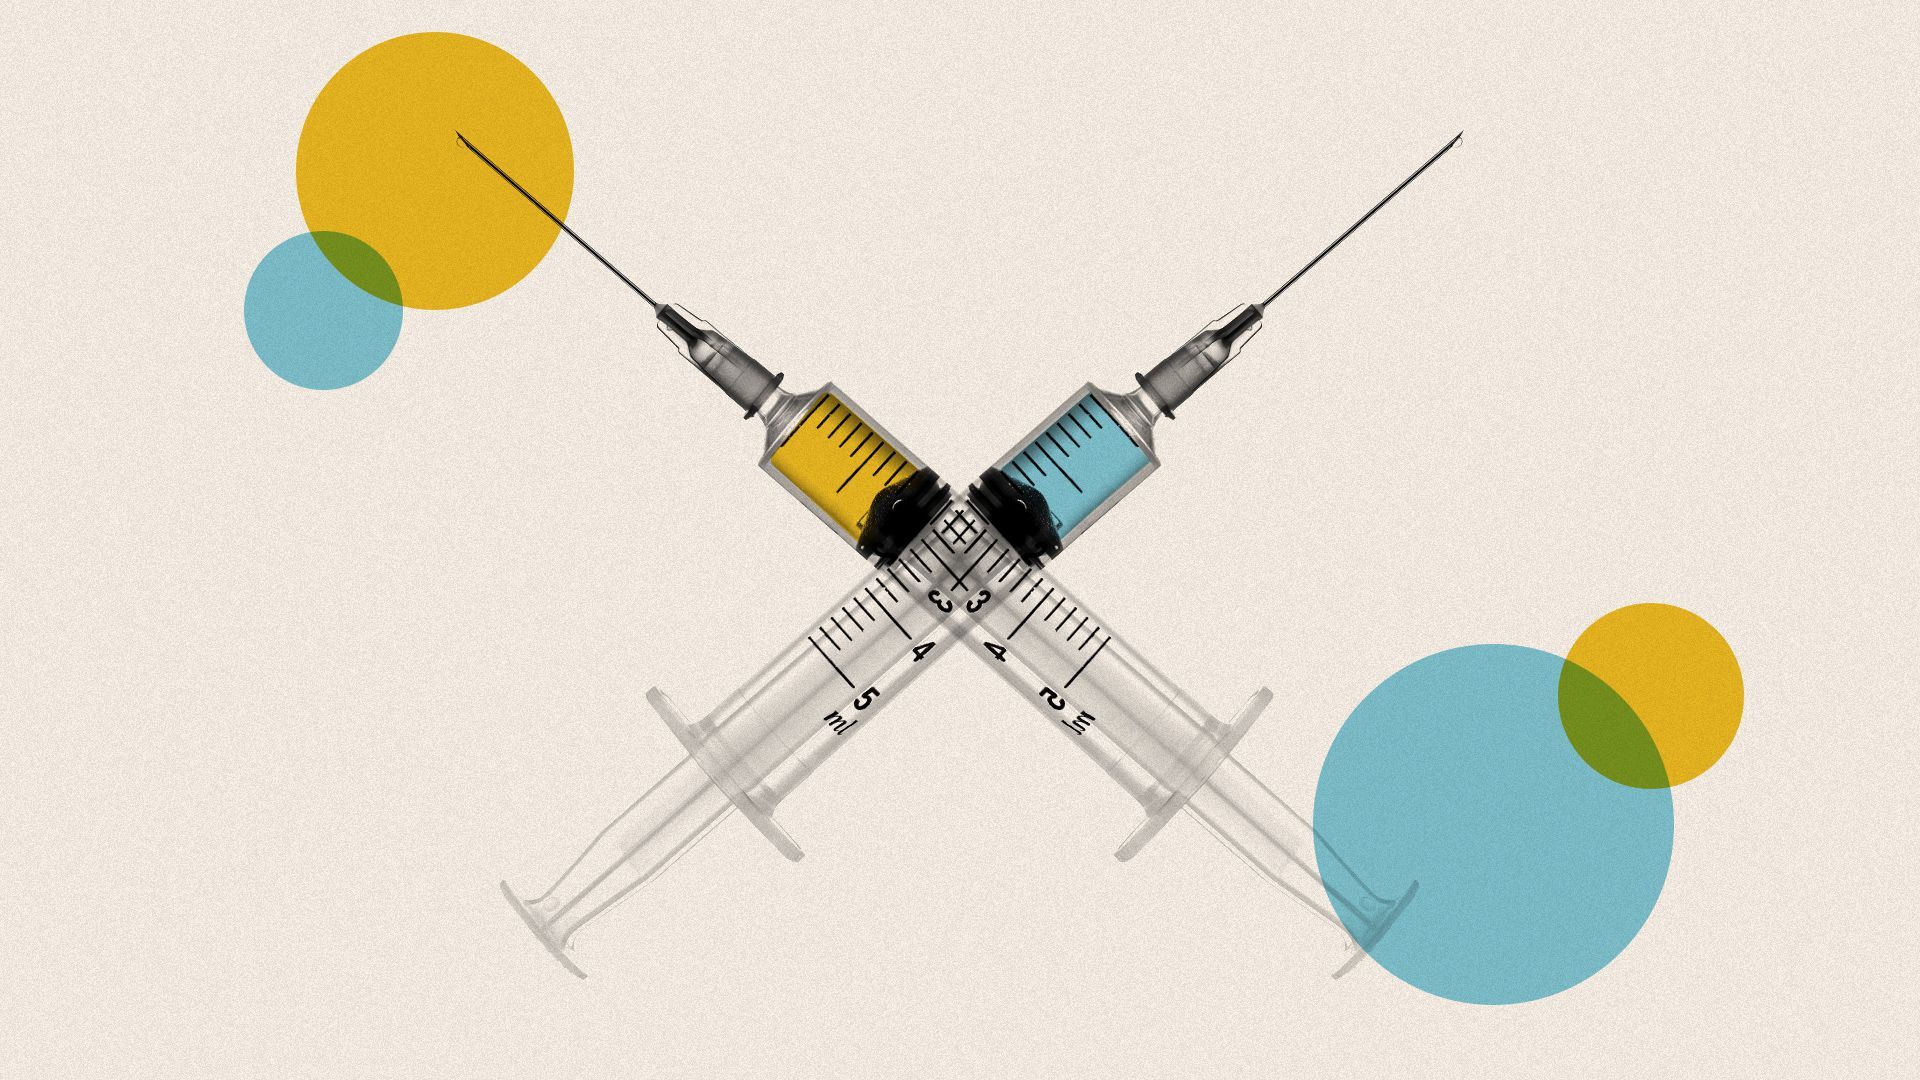 Illustration of two crossed syringes surrounded by circles